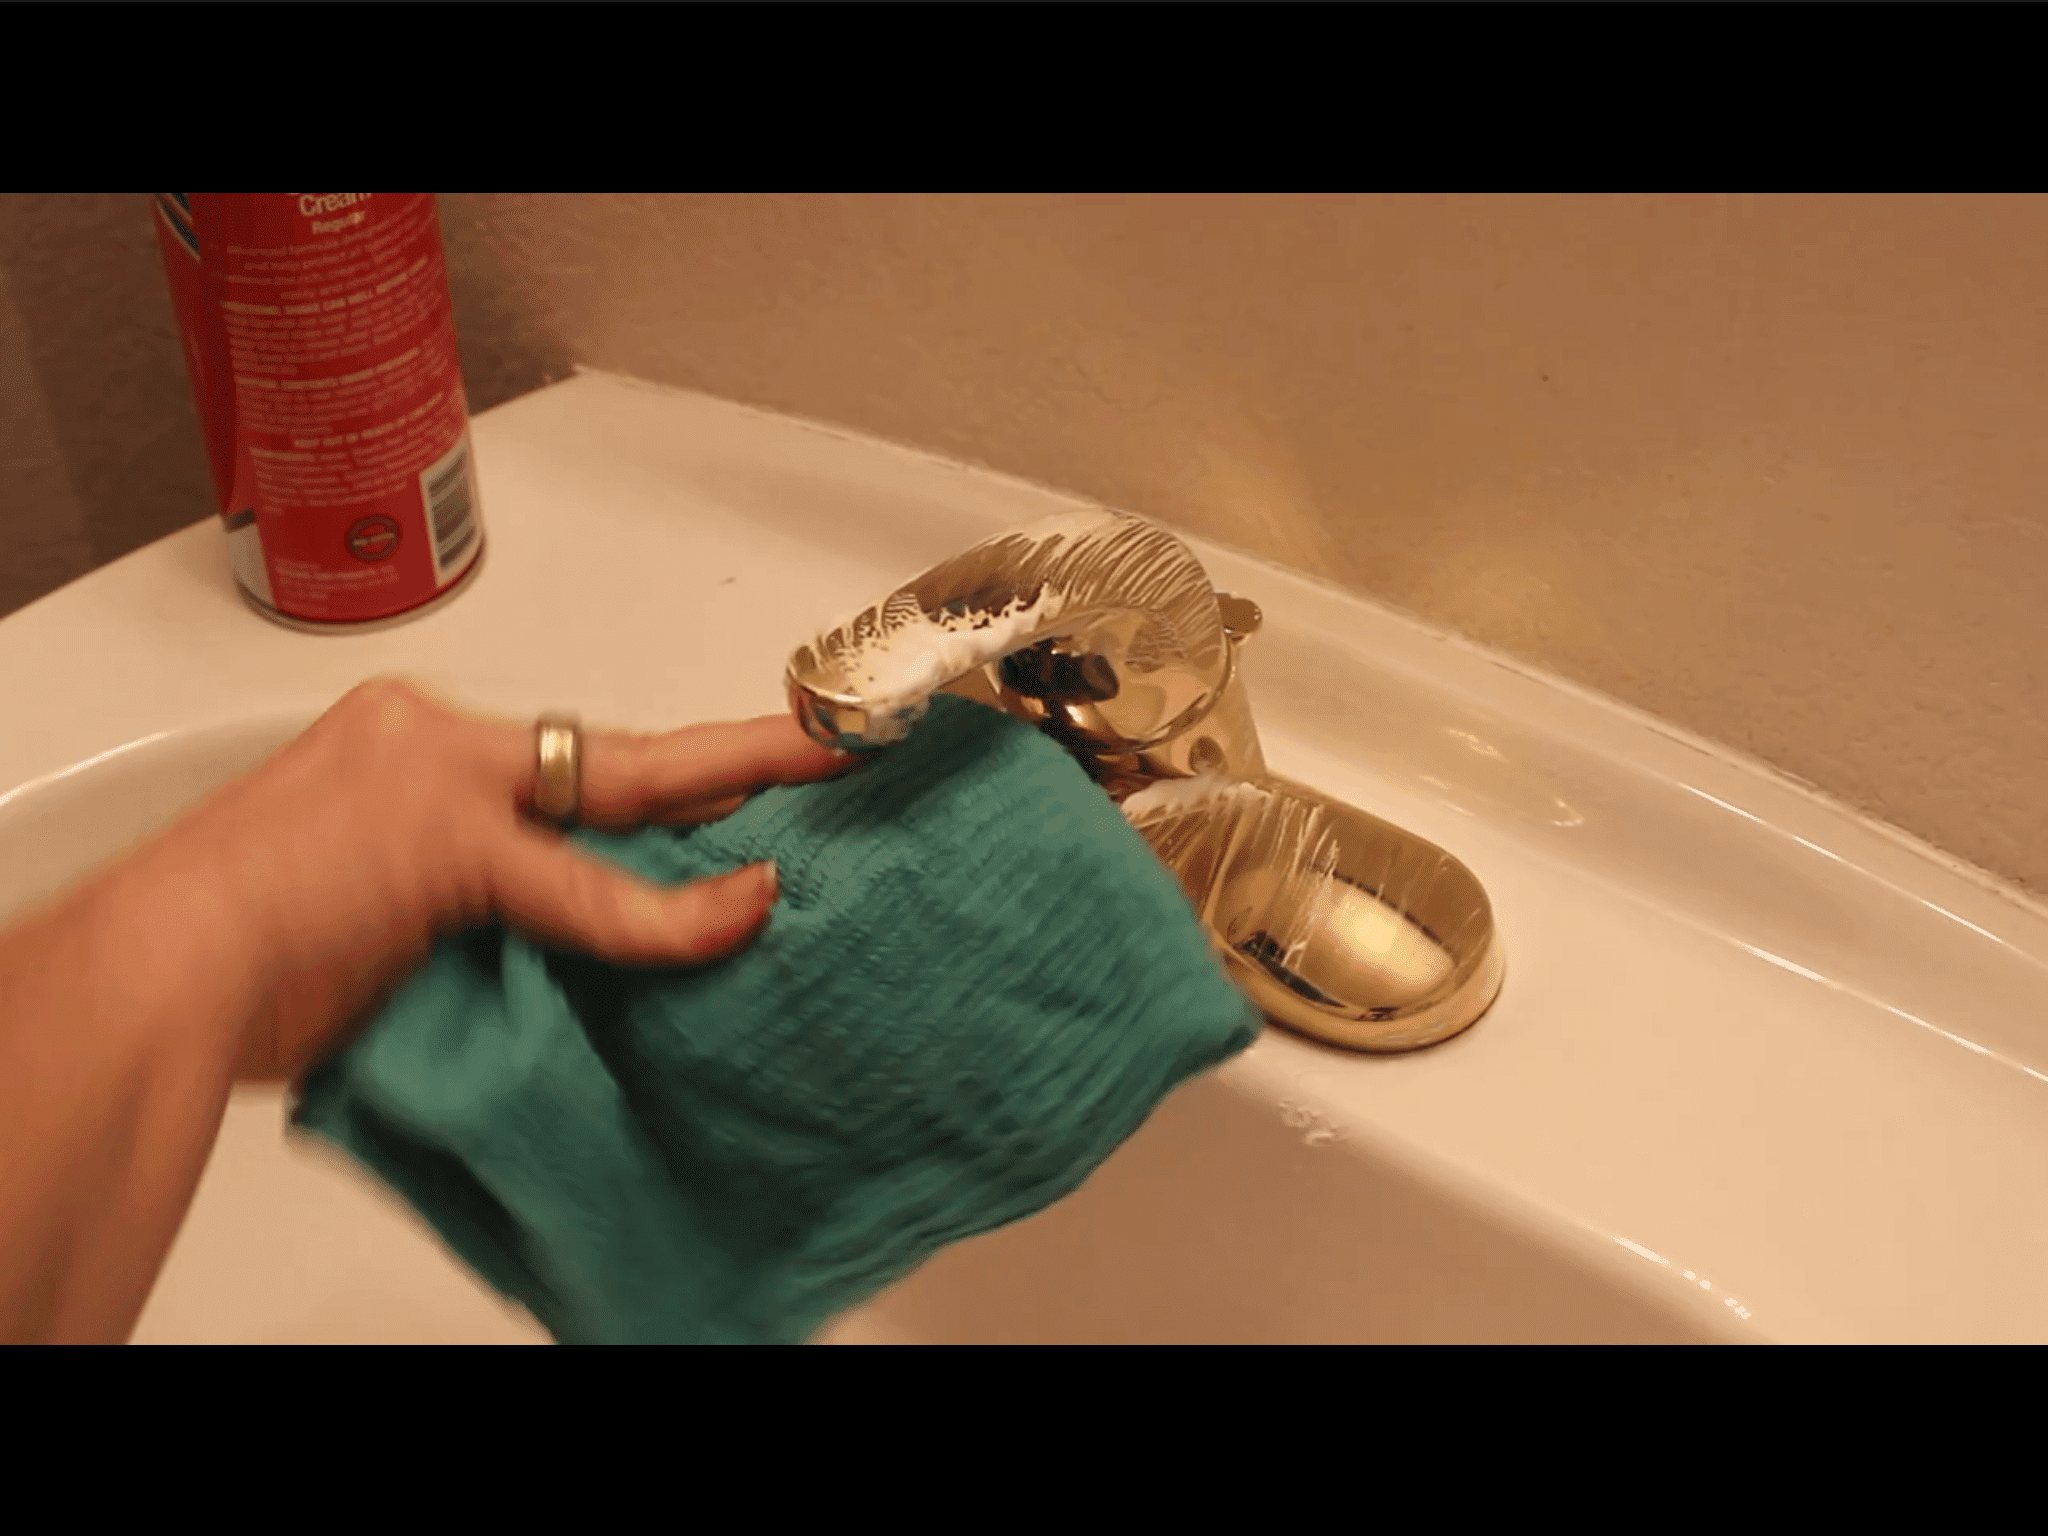 cleaning brass faucets with shaving cream